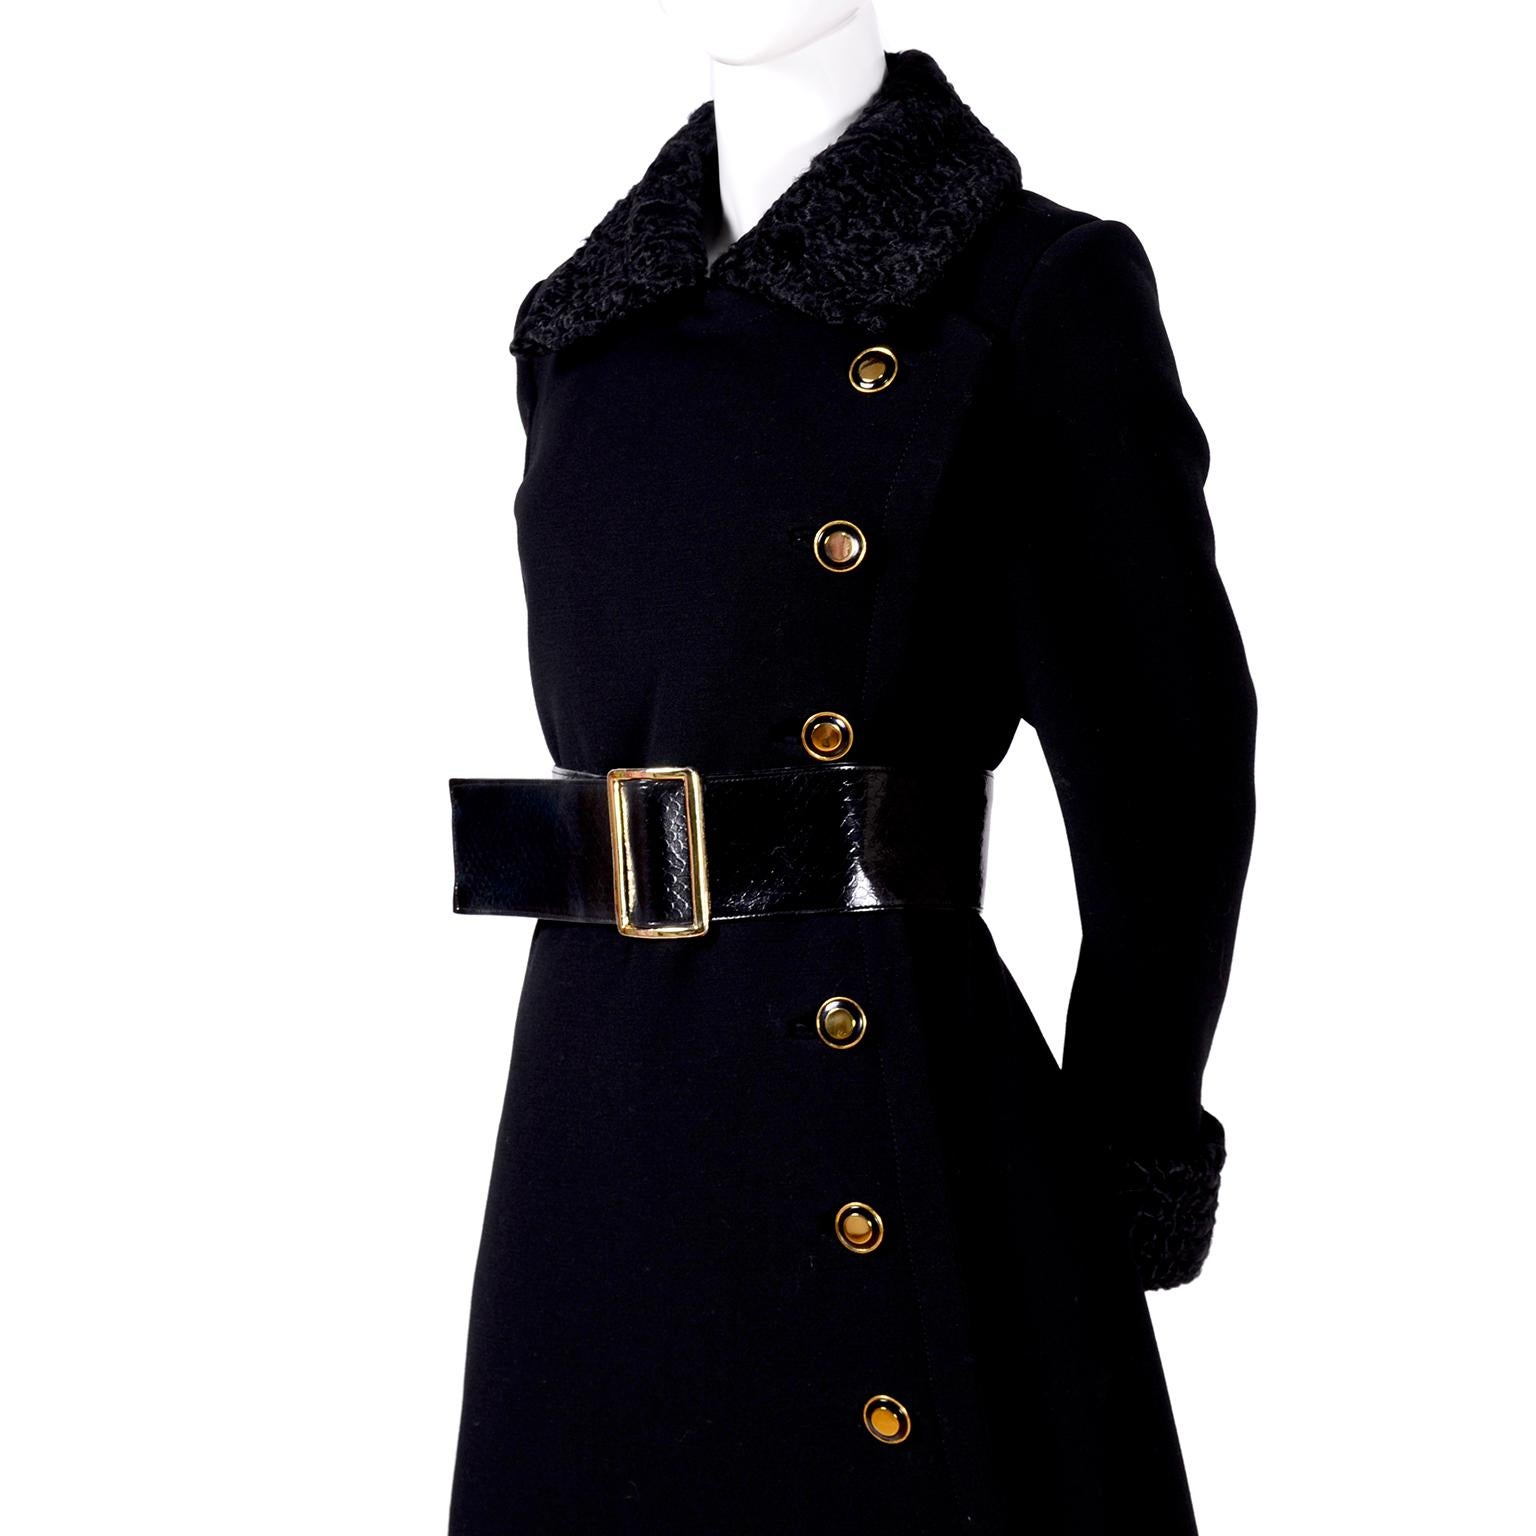 This is an absolutely gorgeous vintage coat from Givenchy. This structured wool coat is from the estate of a 93 year old retired California judge who had an impressive collection of designer clothing and accessories. We were fortunate to acquire her